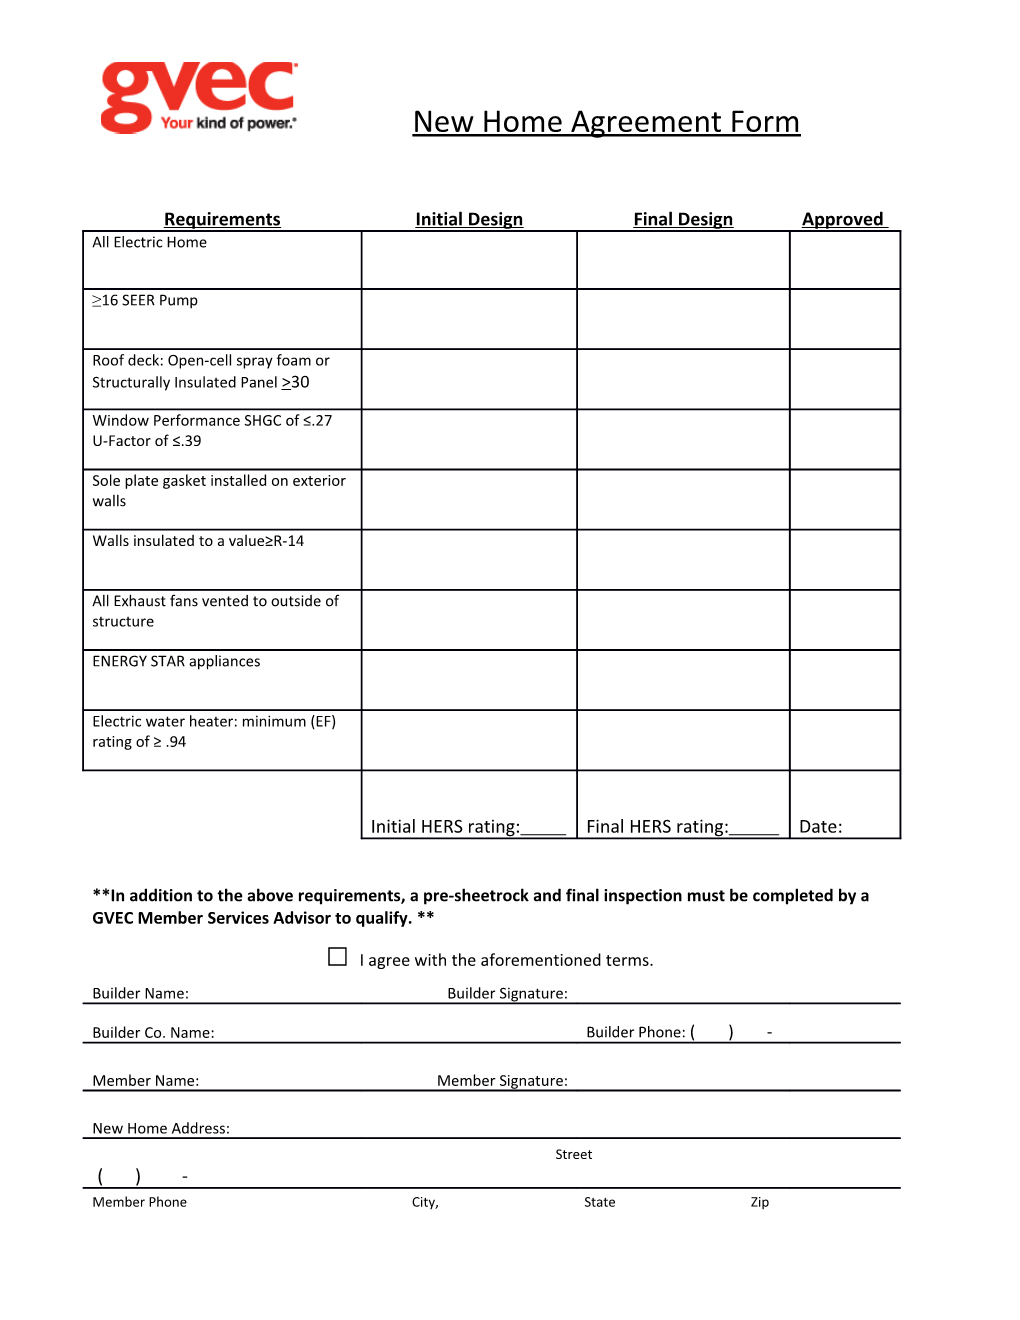 New Home Agreement Form